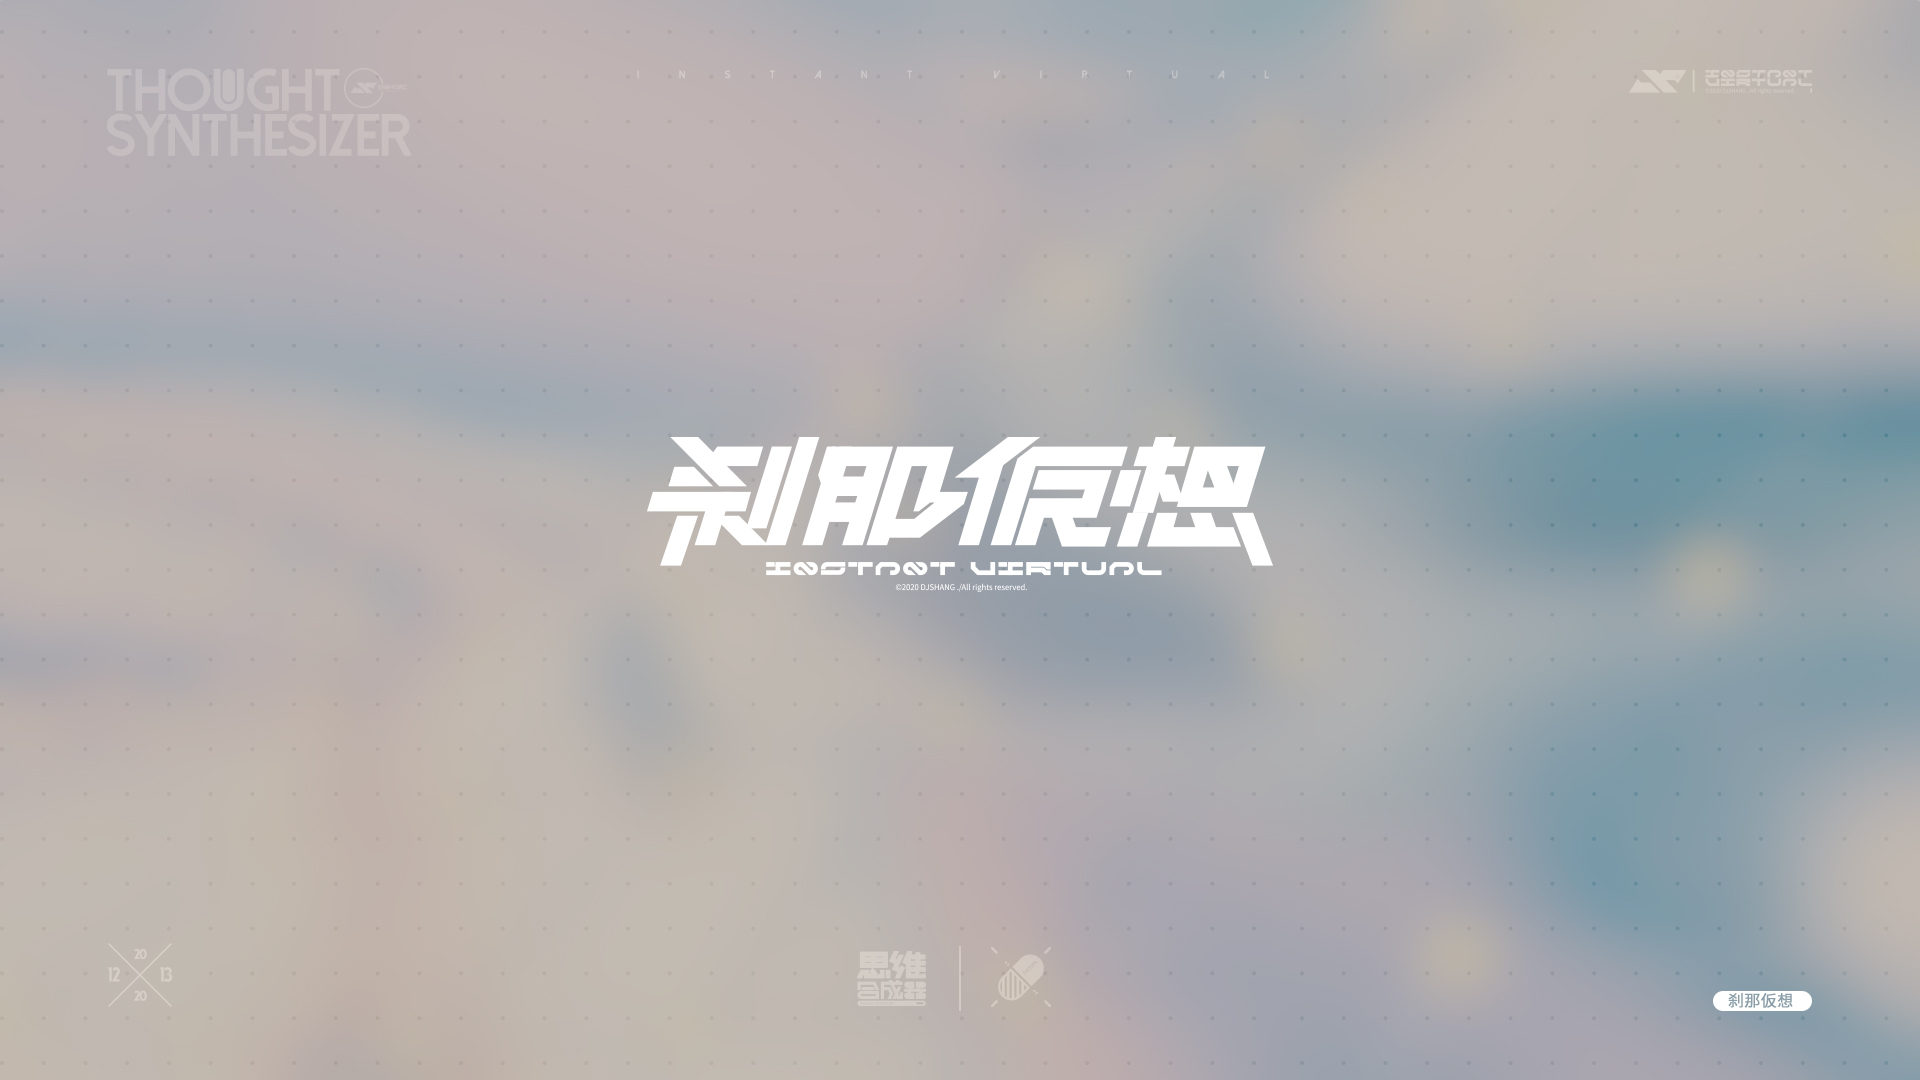 Thought synthesizer-Have a visual feast – Free Chinese Font Download